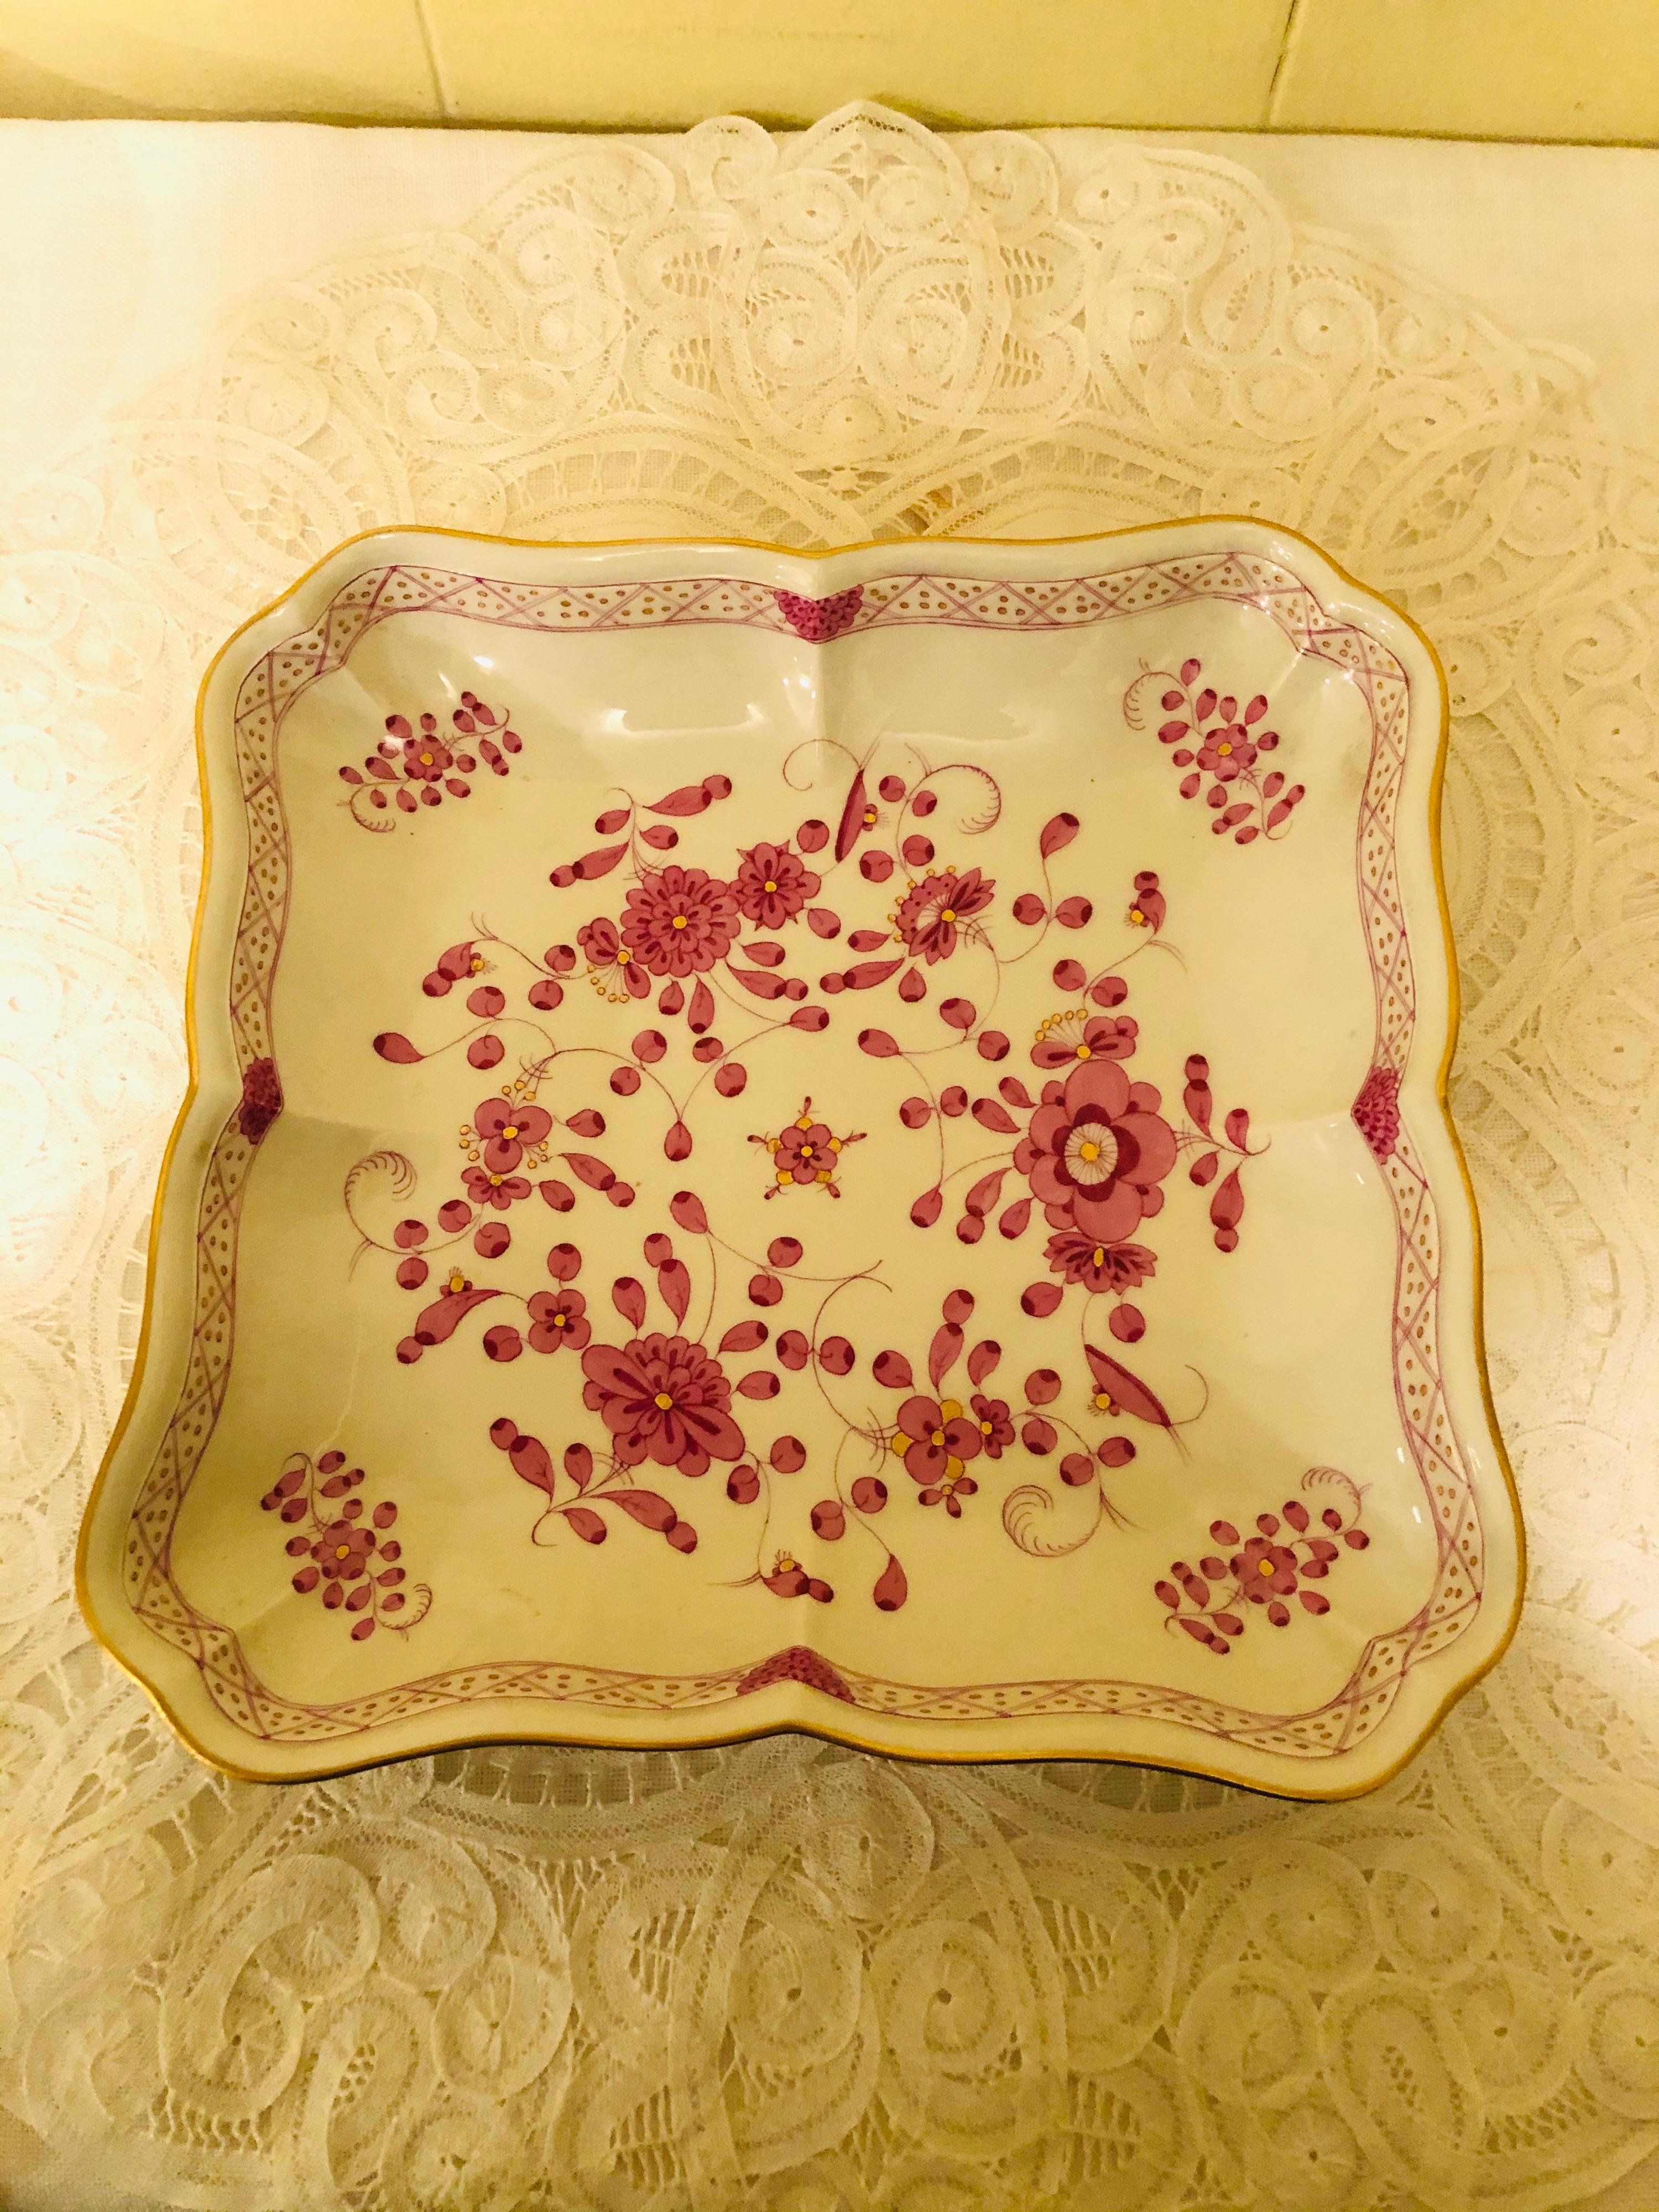 I would like to offer you this beautiful Meissen purple Indian serving bowl in this unusual square form.  It has detailed paintings of pink flowers with some purple and gold accents on a white ground. The detail of the painting on this bowl is